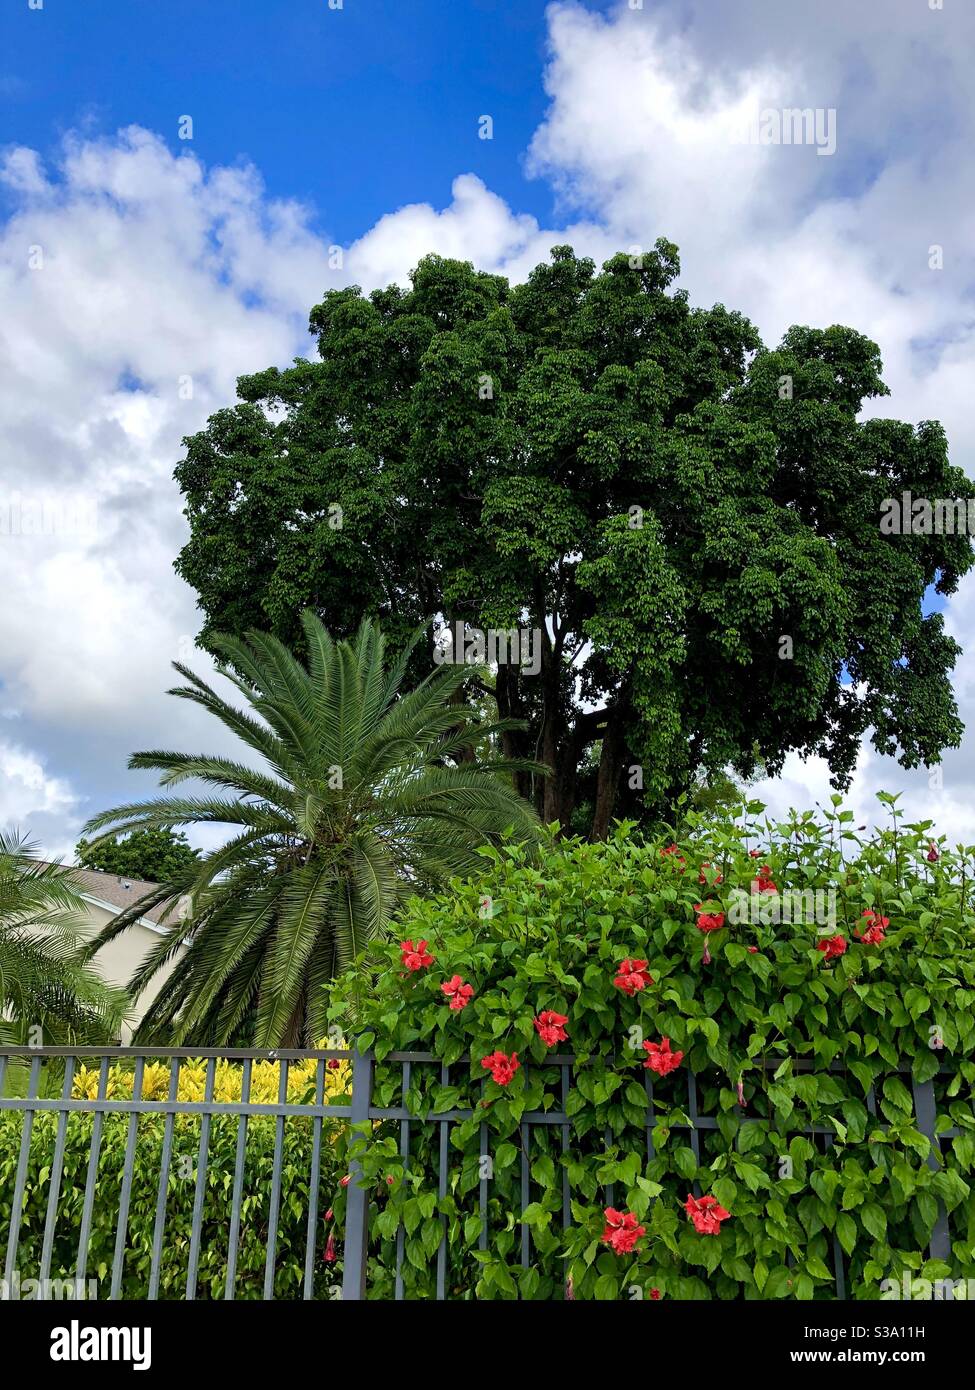 A variety of trees and plants in Florida : Hibiscus, Palm, and Bishopwood (Bischofia javanica.) Stock Photo